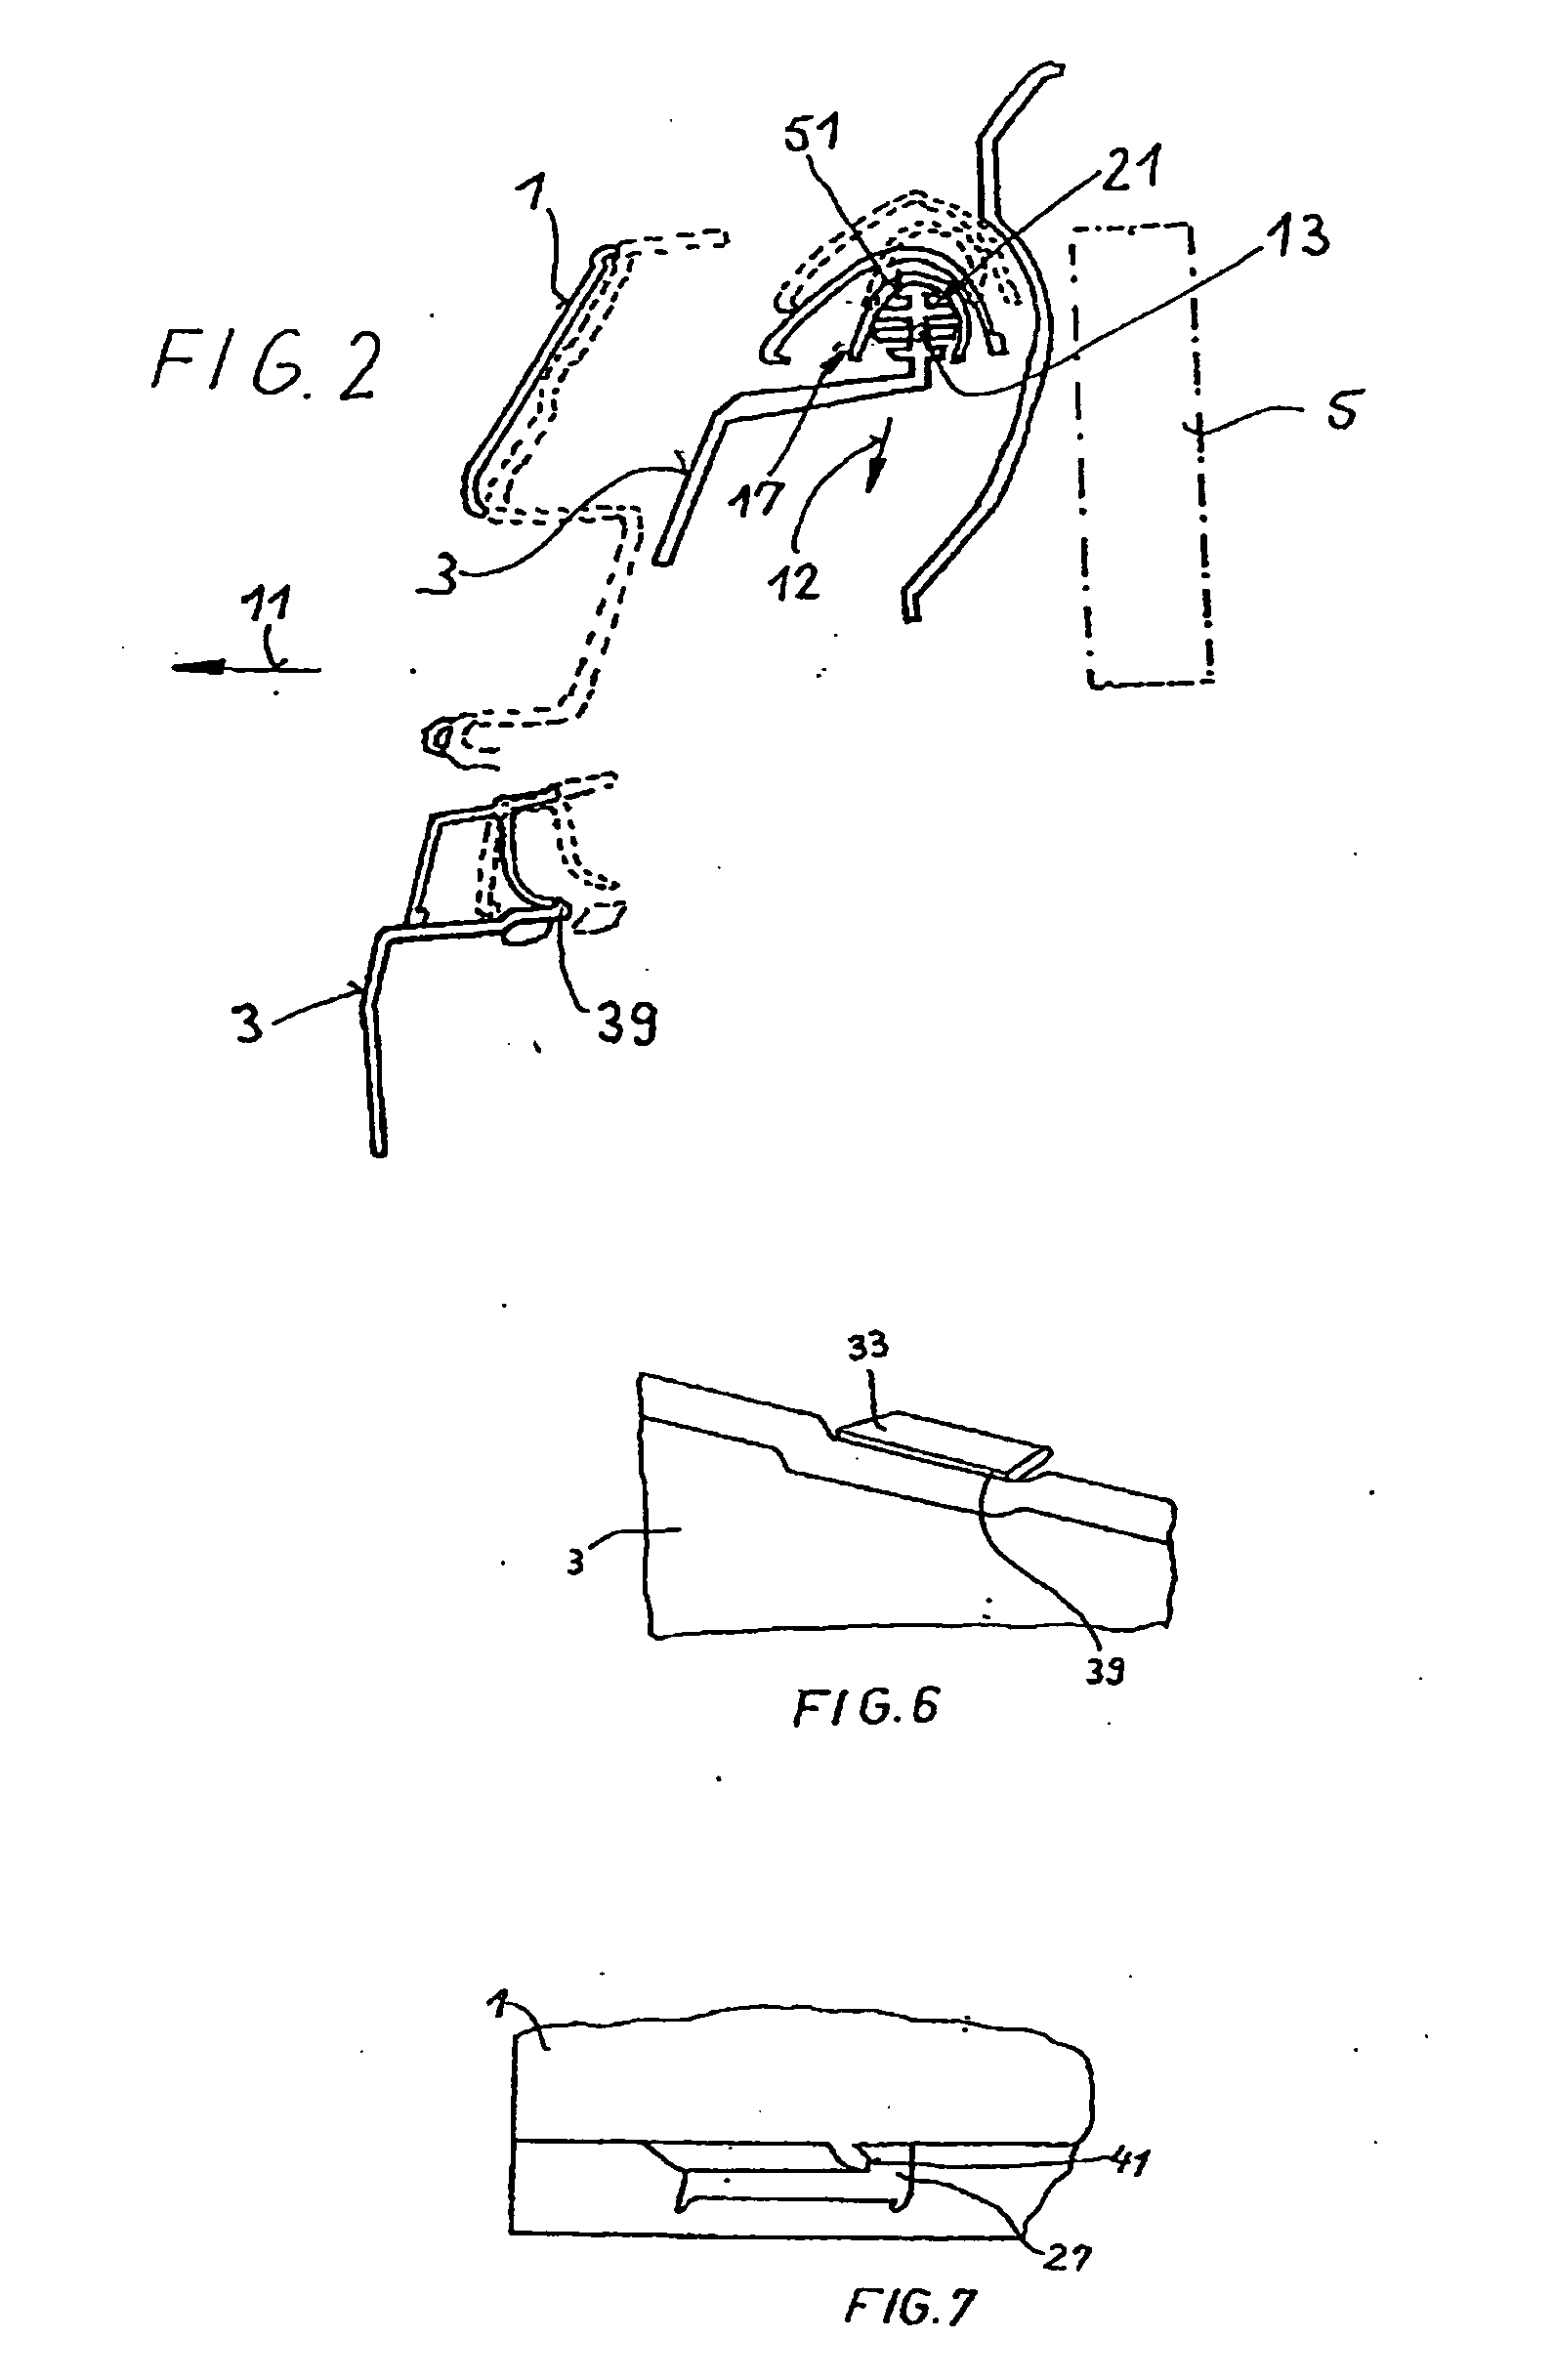 Mounting for a radiator casing in a motor vehicle